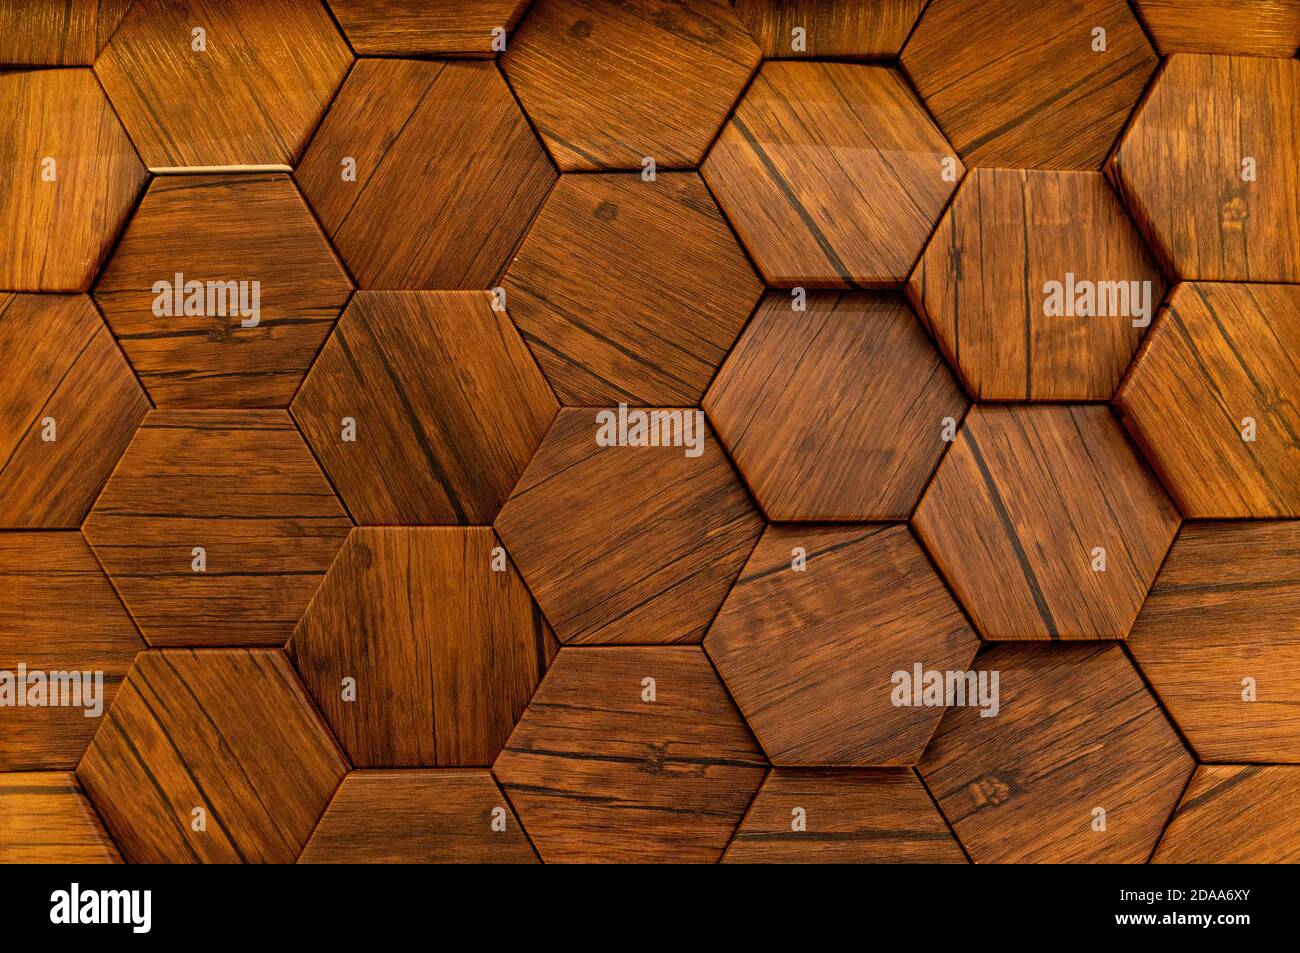 Wooden Pieces From A Hexagon Spike Puzzle Isolated On A White Background  Stock Photo - Download Image Now - iStock